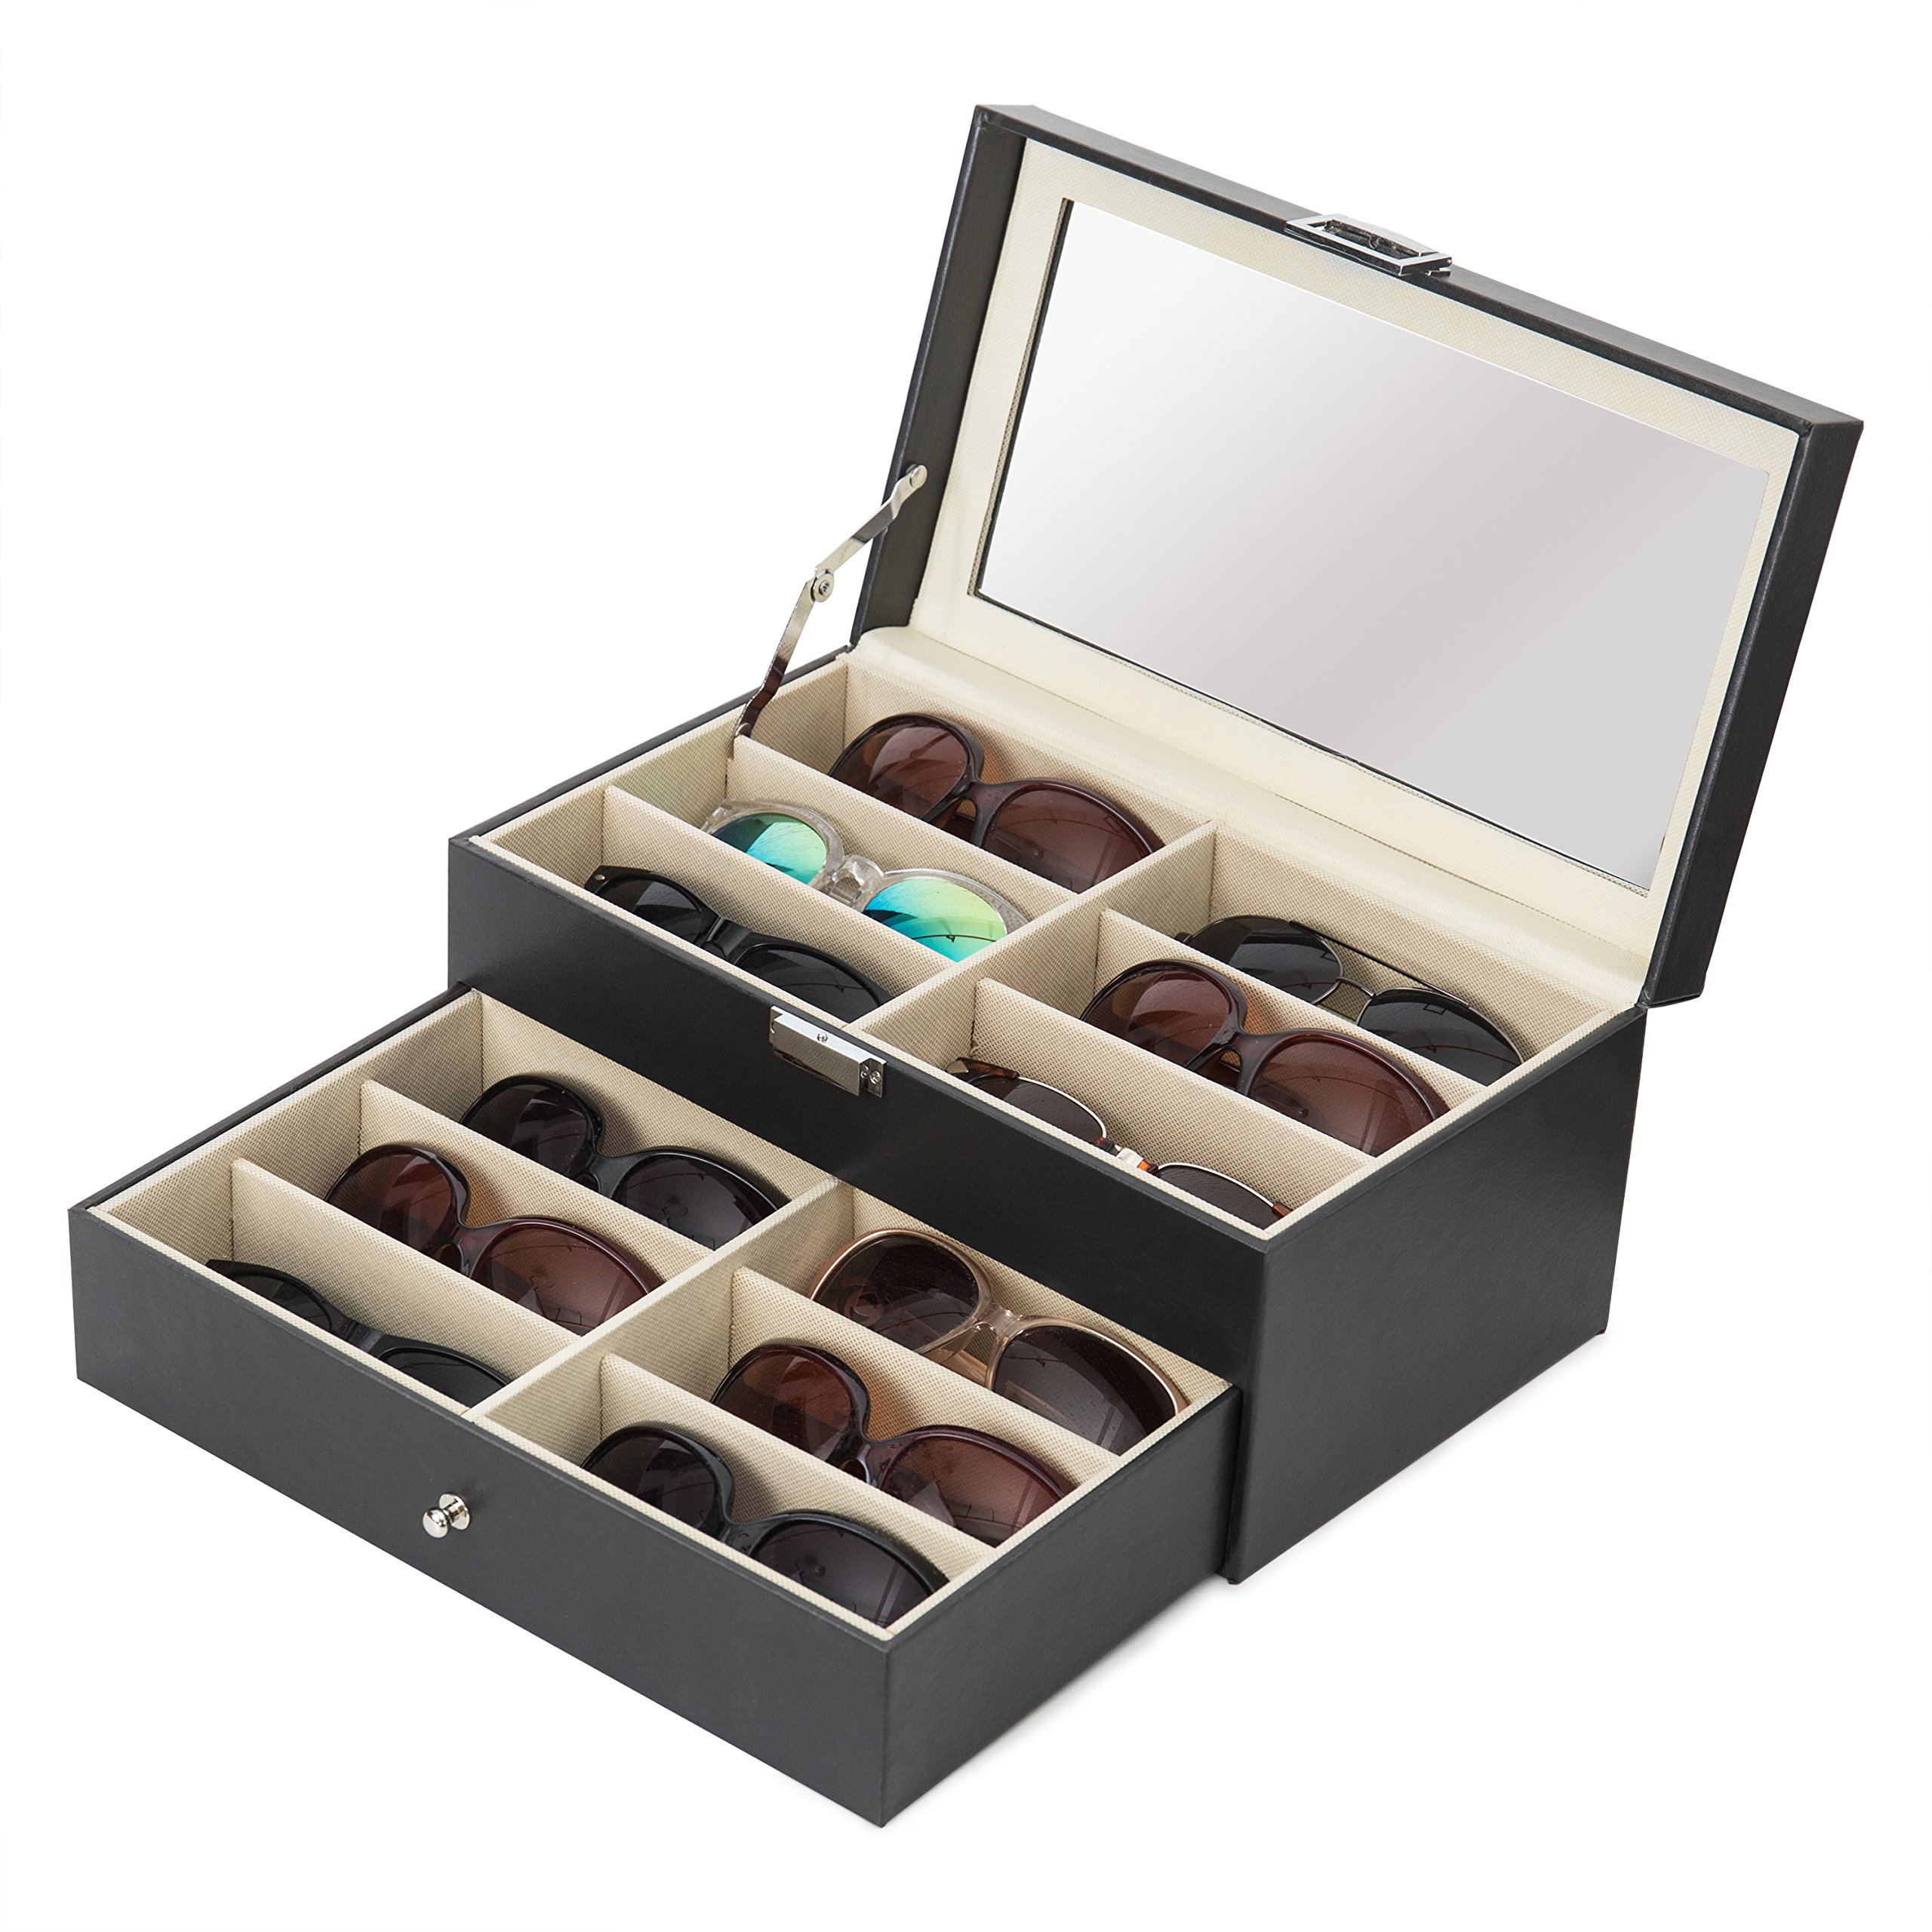 MyGift Deluxe Black Sunglass Storage Case - 12 Slot Eyewear Display Box with Glass Lid and Leatherette Trim